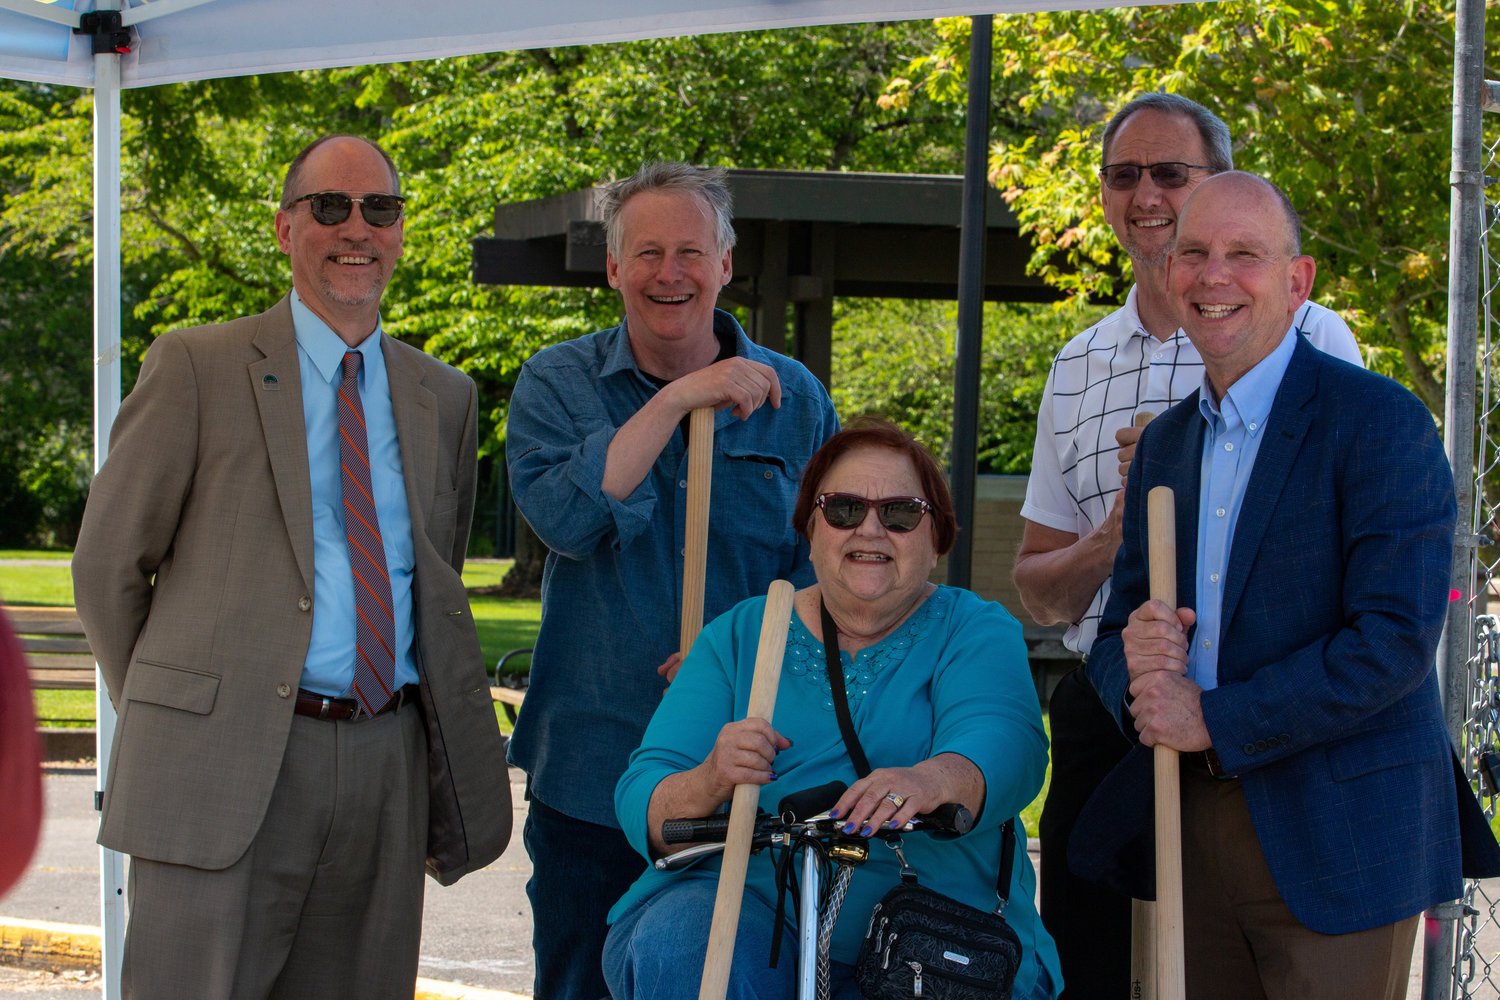 Centralia College President Bob Mohrbacher, Board of Trustees members Court Stanley, Doris Wood-Brumsickle and Mark Scheibmeir and Athletic Director Bob Peters pose for a photo during the groundbreaking ceremony for the athletic field Wednesday.